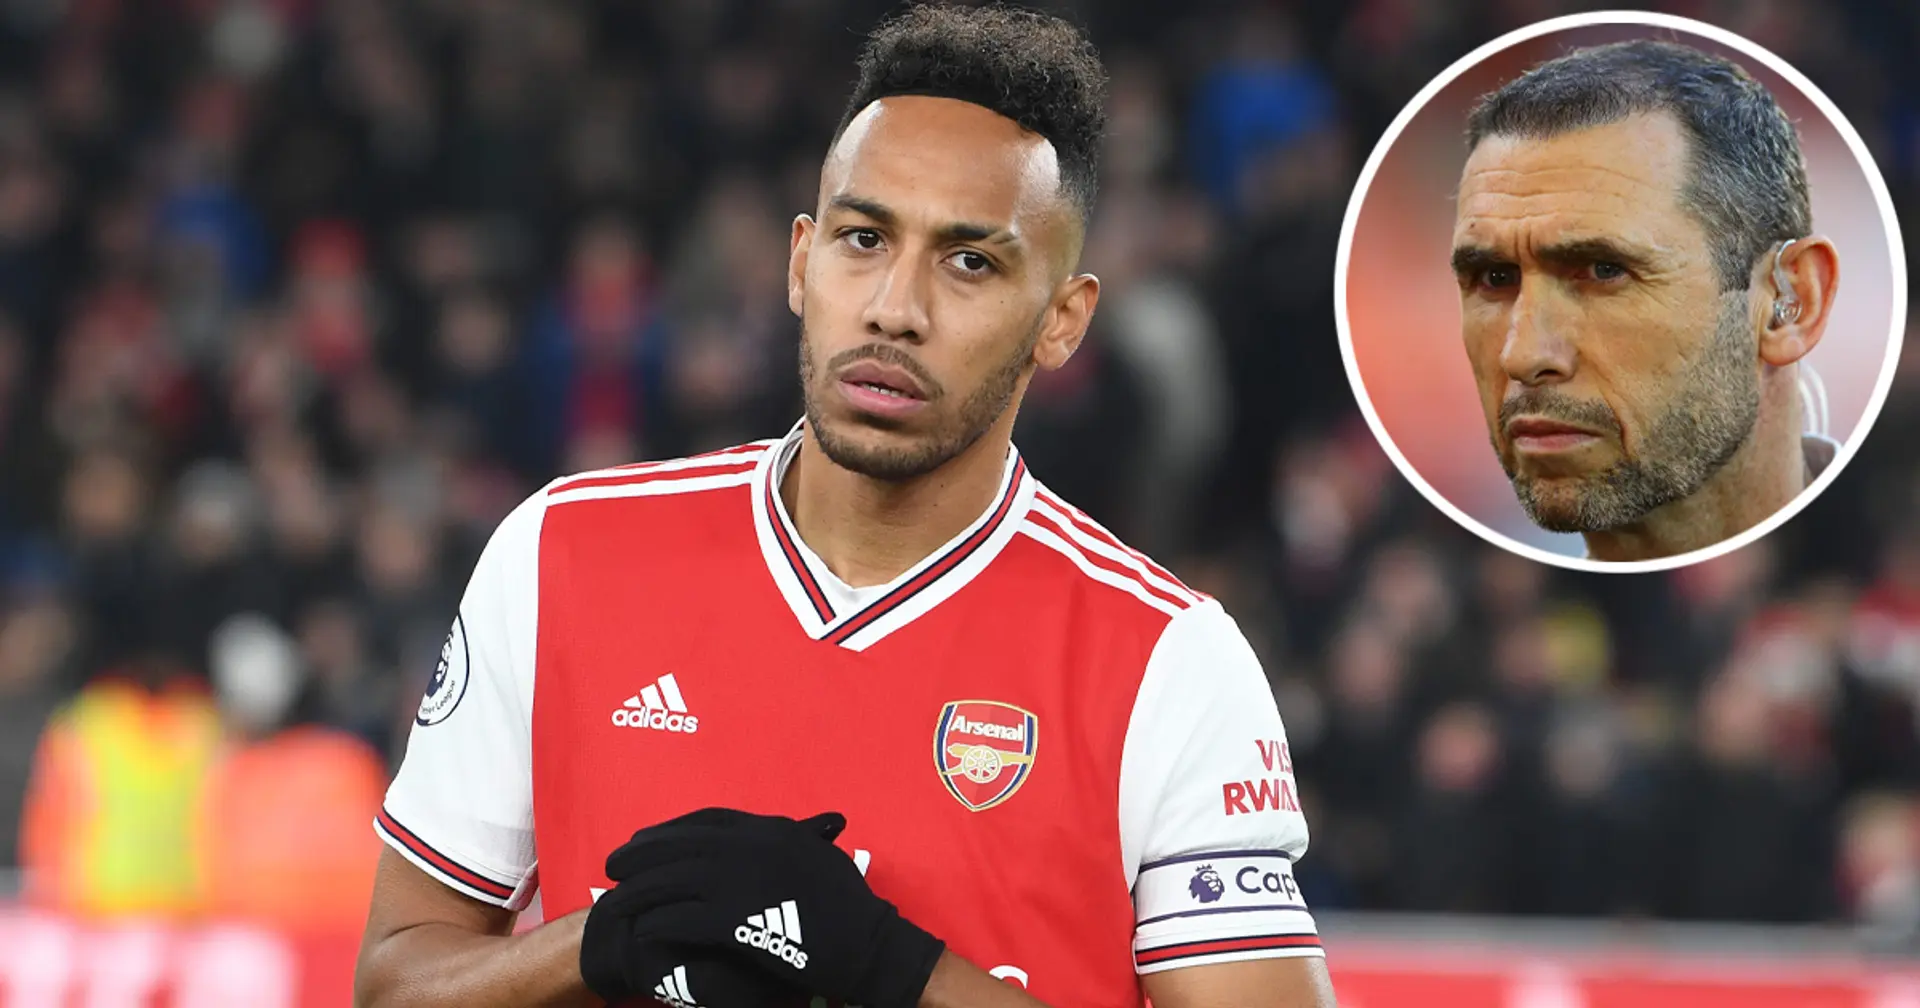 Martin Keown believes Mikel Arteta should discipline Aubameyang if he doesn't re-sign, here's how